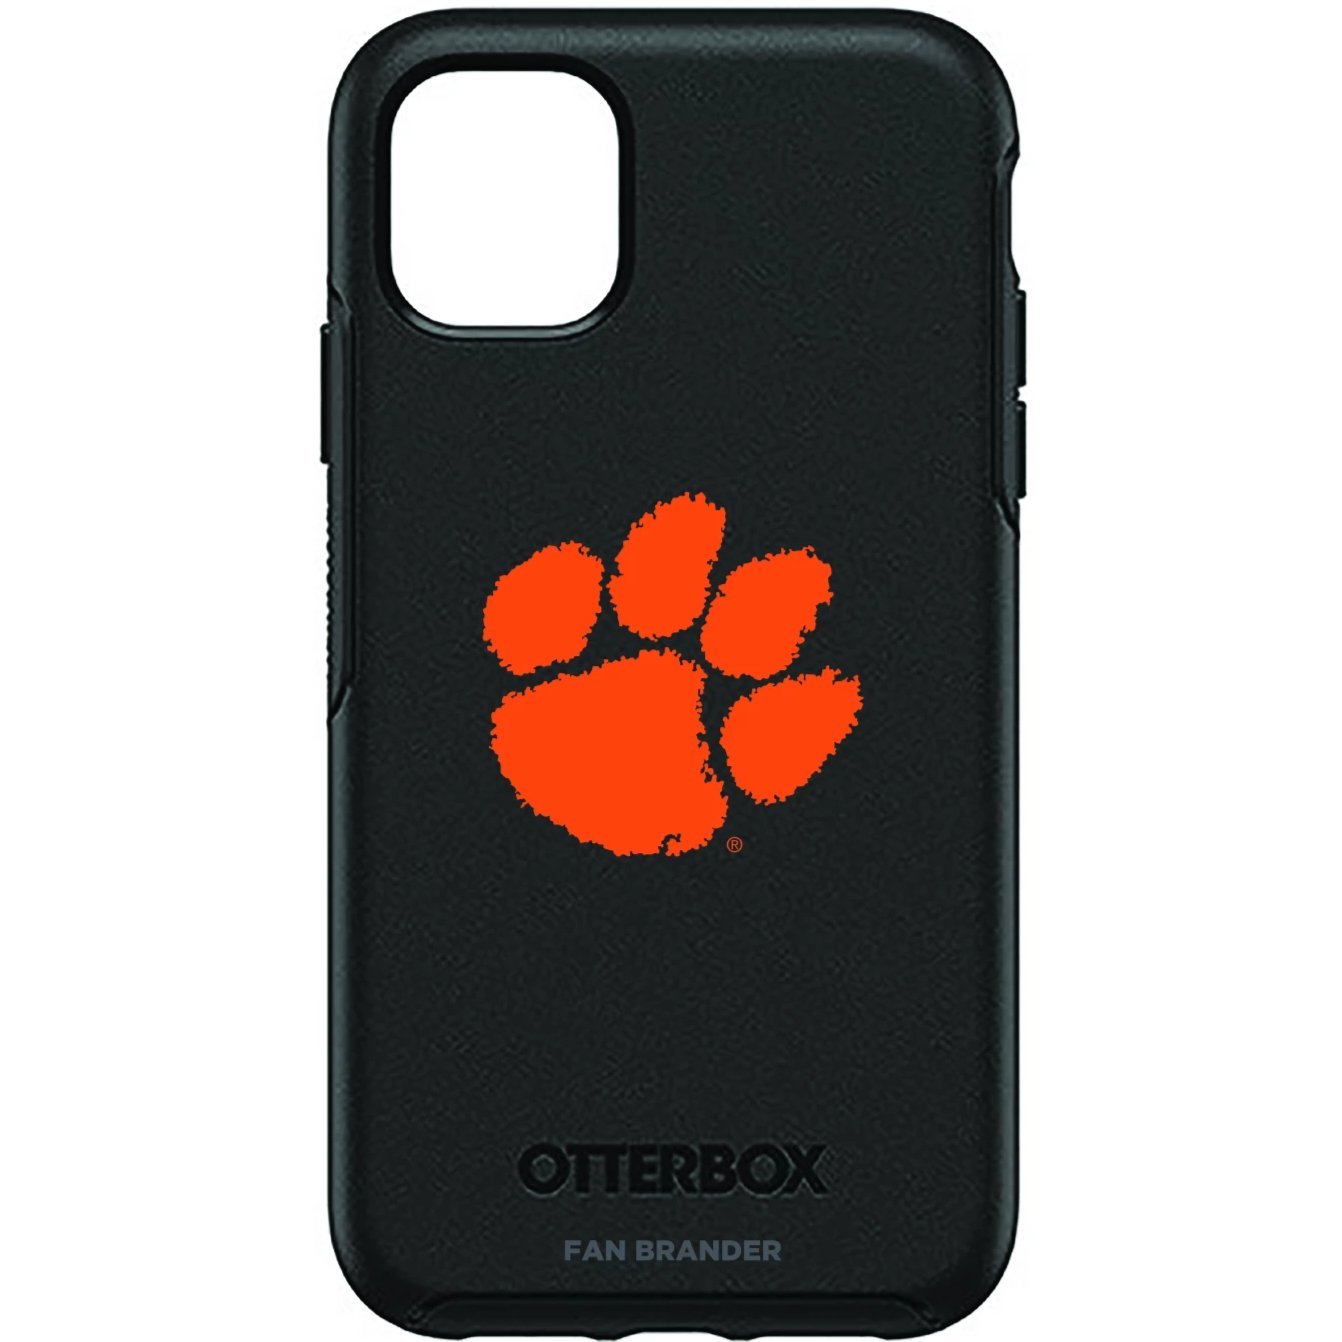 Clemson Tigers Otterbox Symmetry Case (for iPhone 11, Pro, Pro Max)